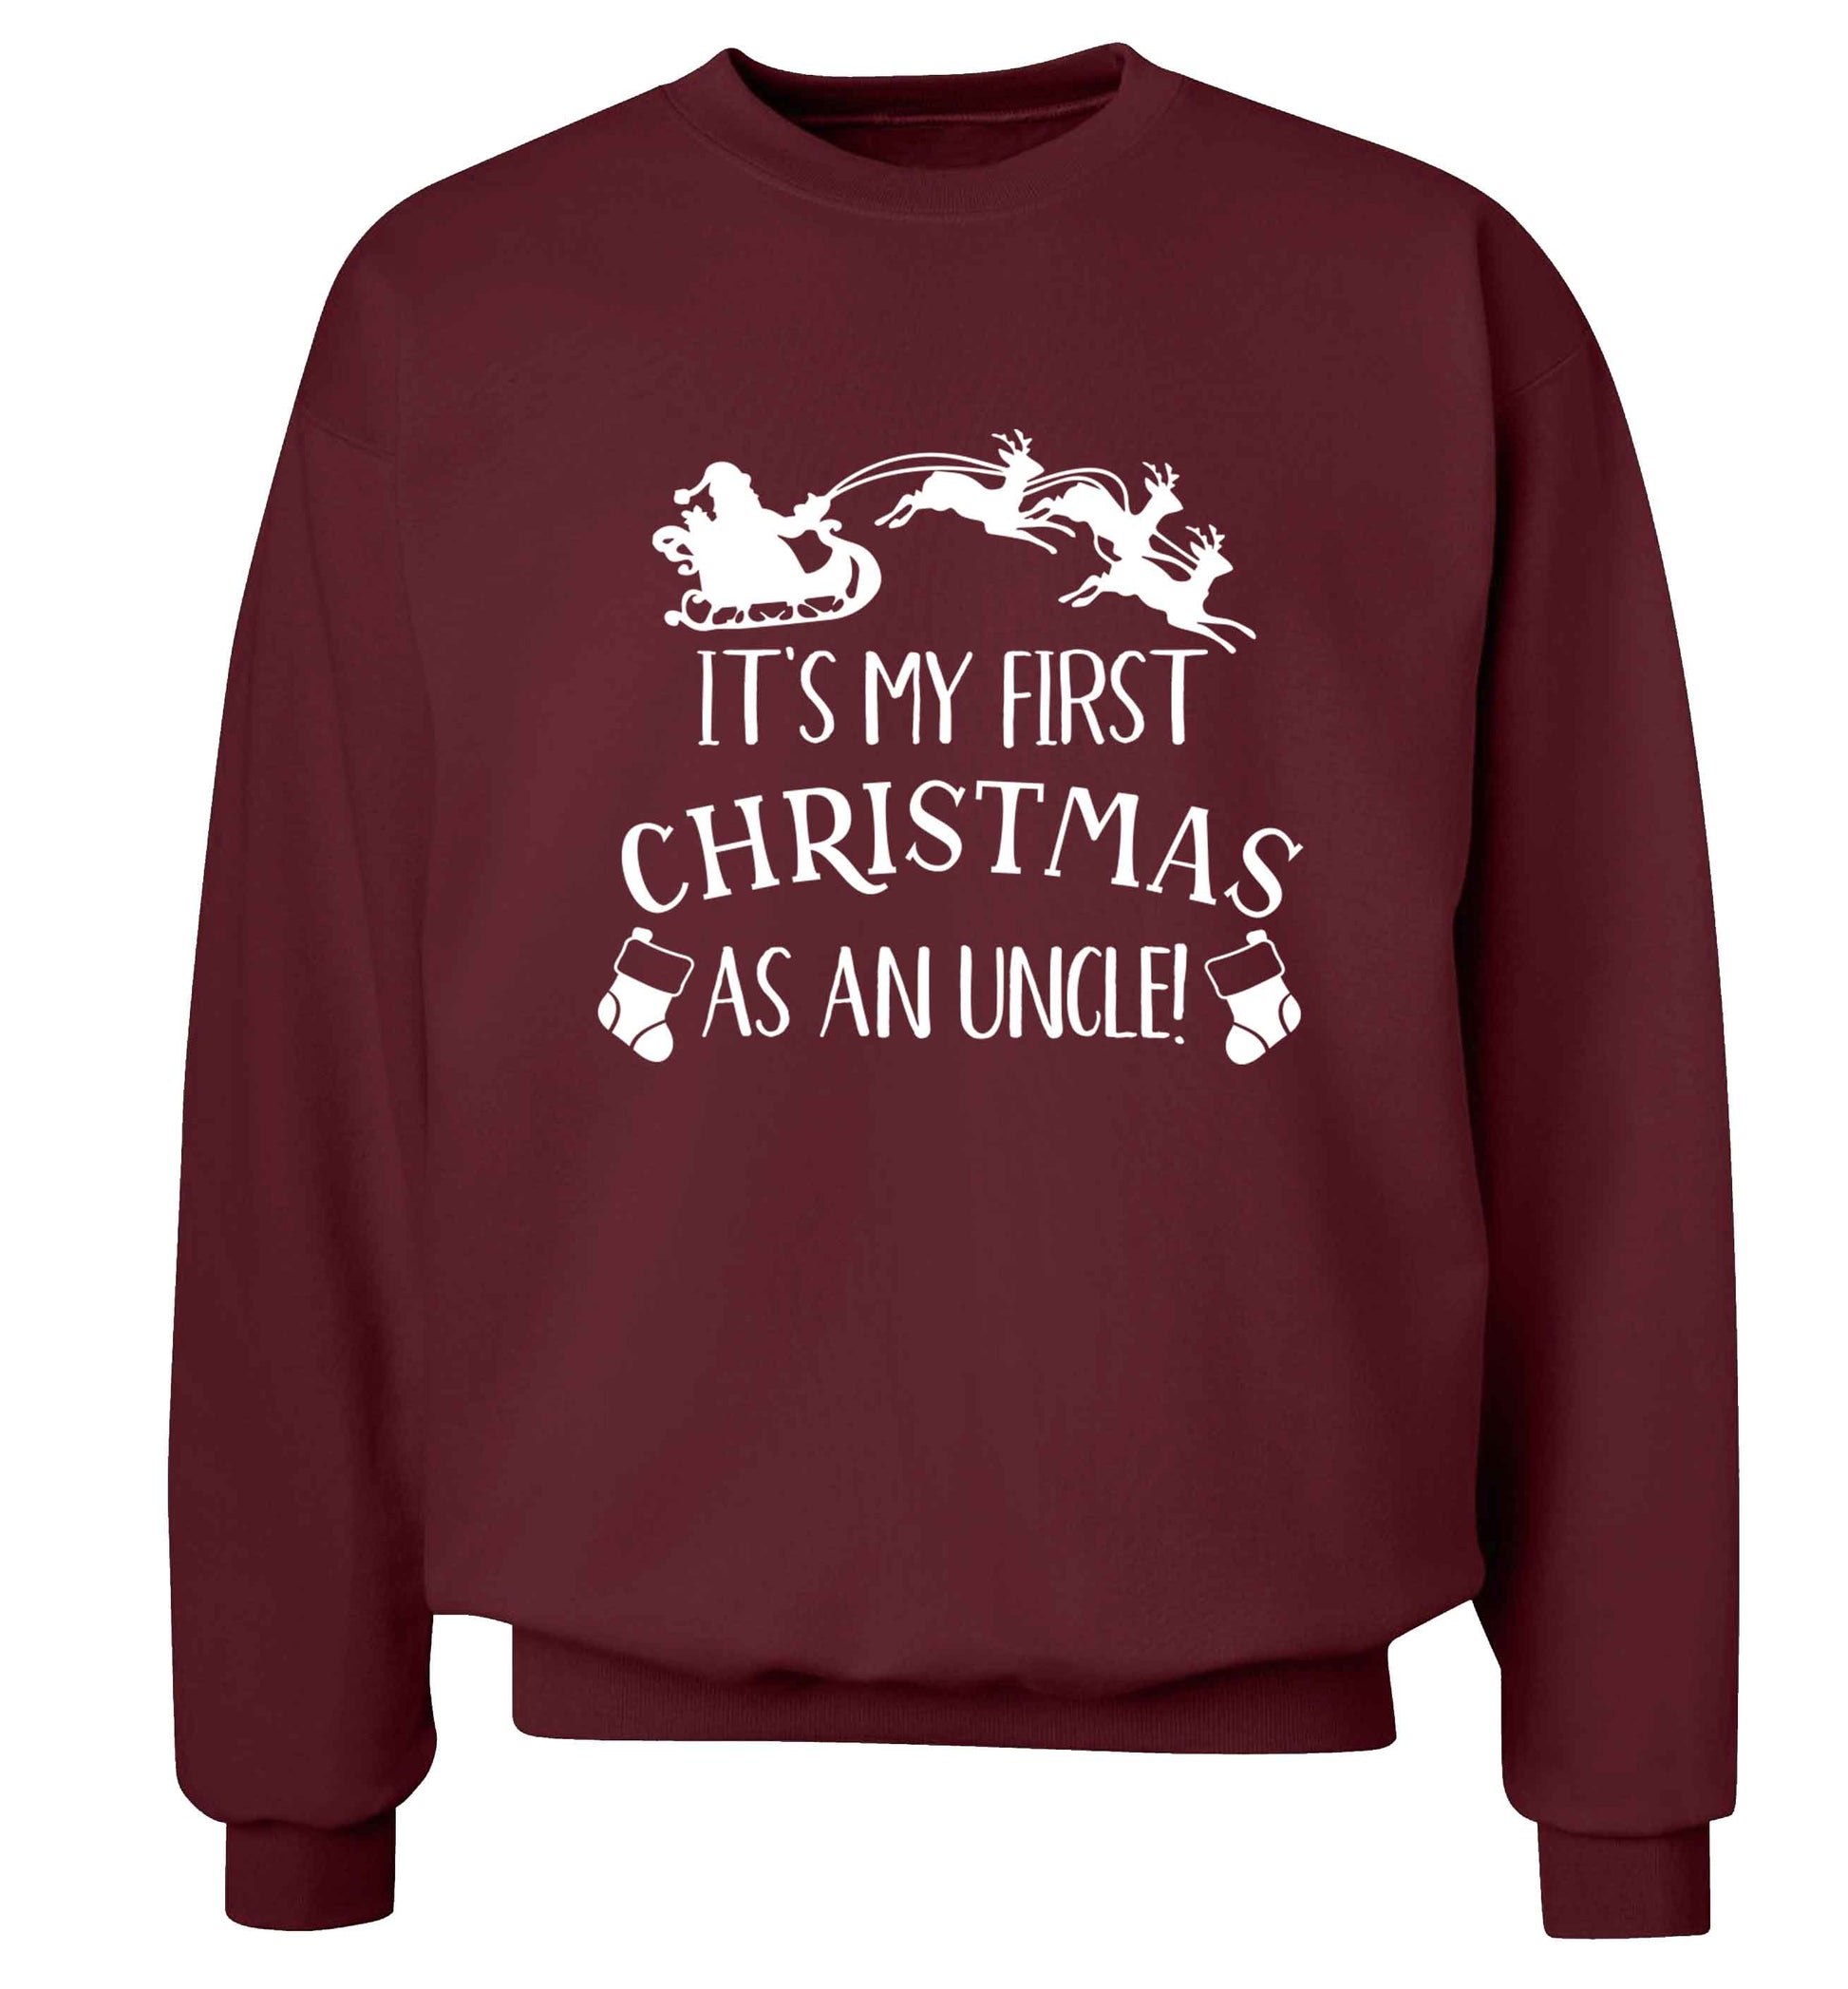 It's my first Christmas as an uncle! Adult's unisex maroon Sweater 2XL